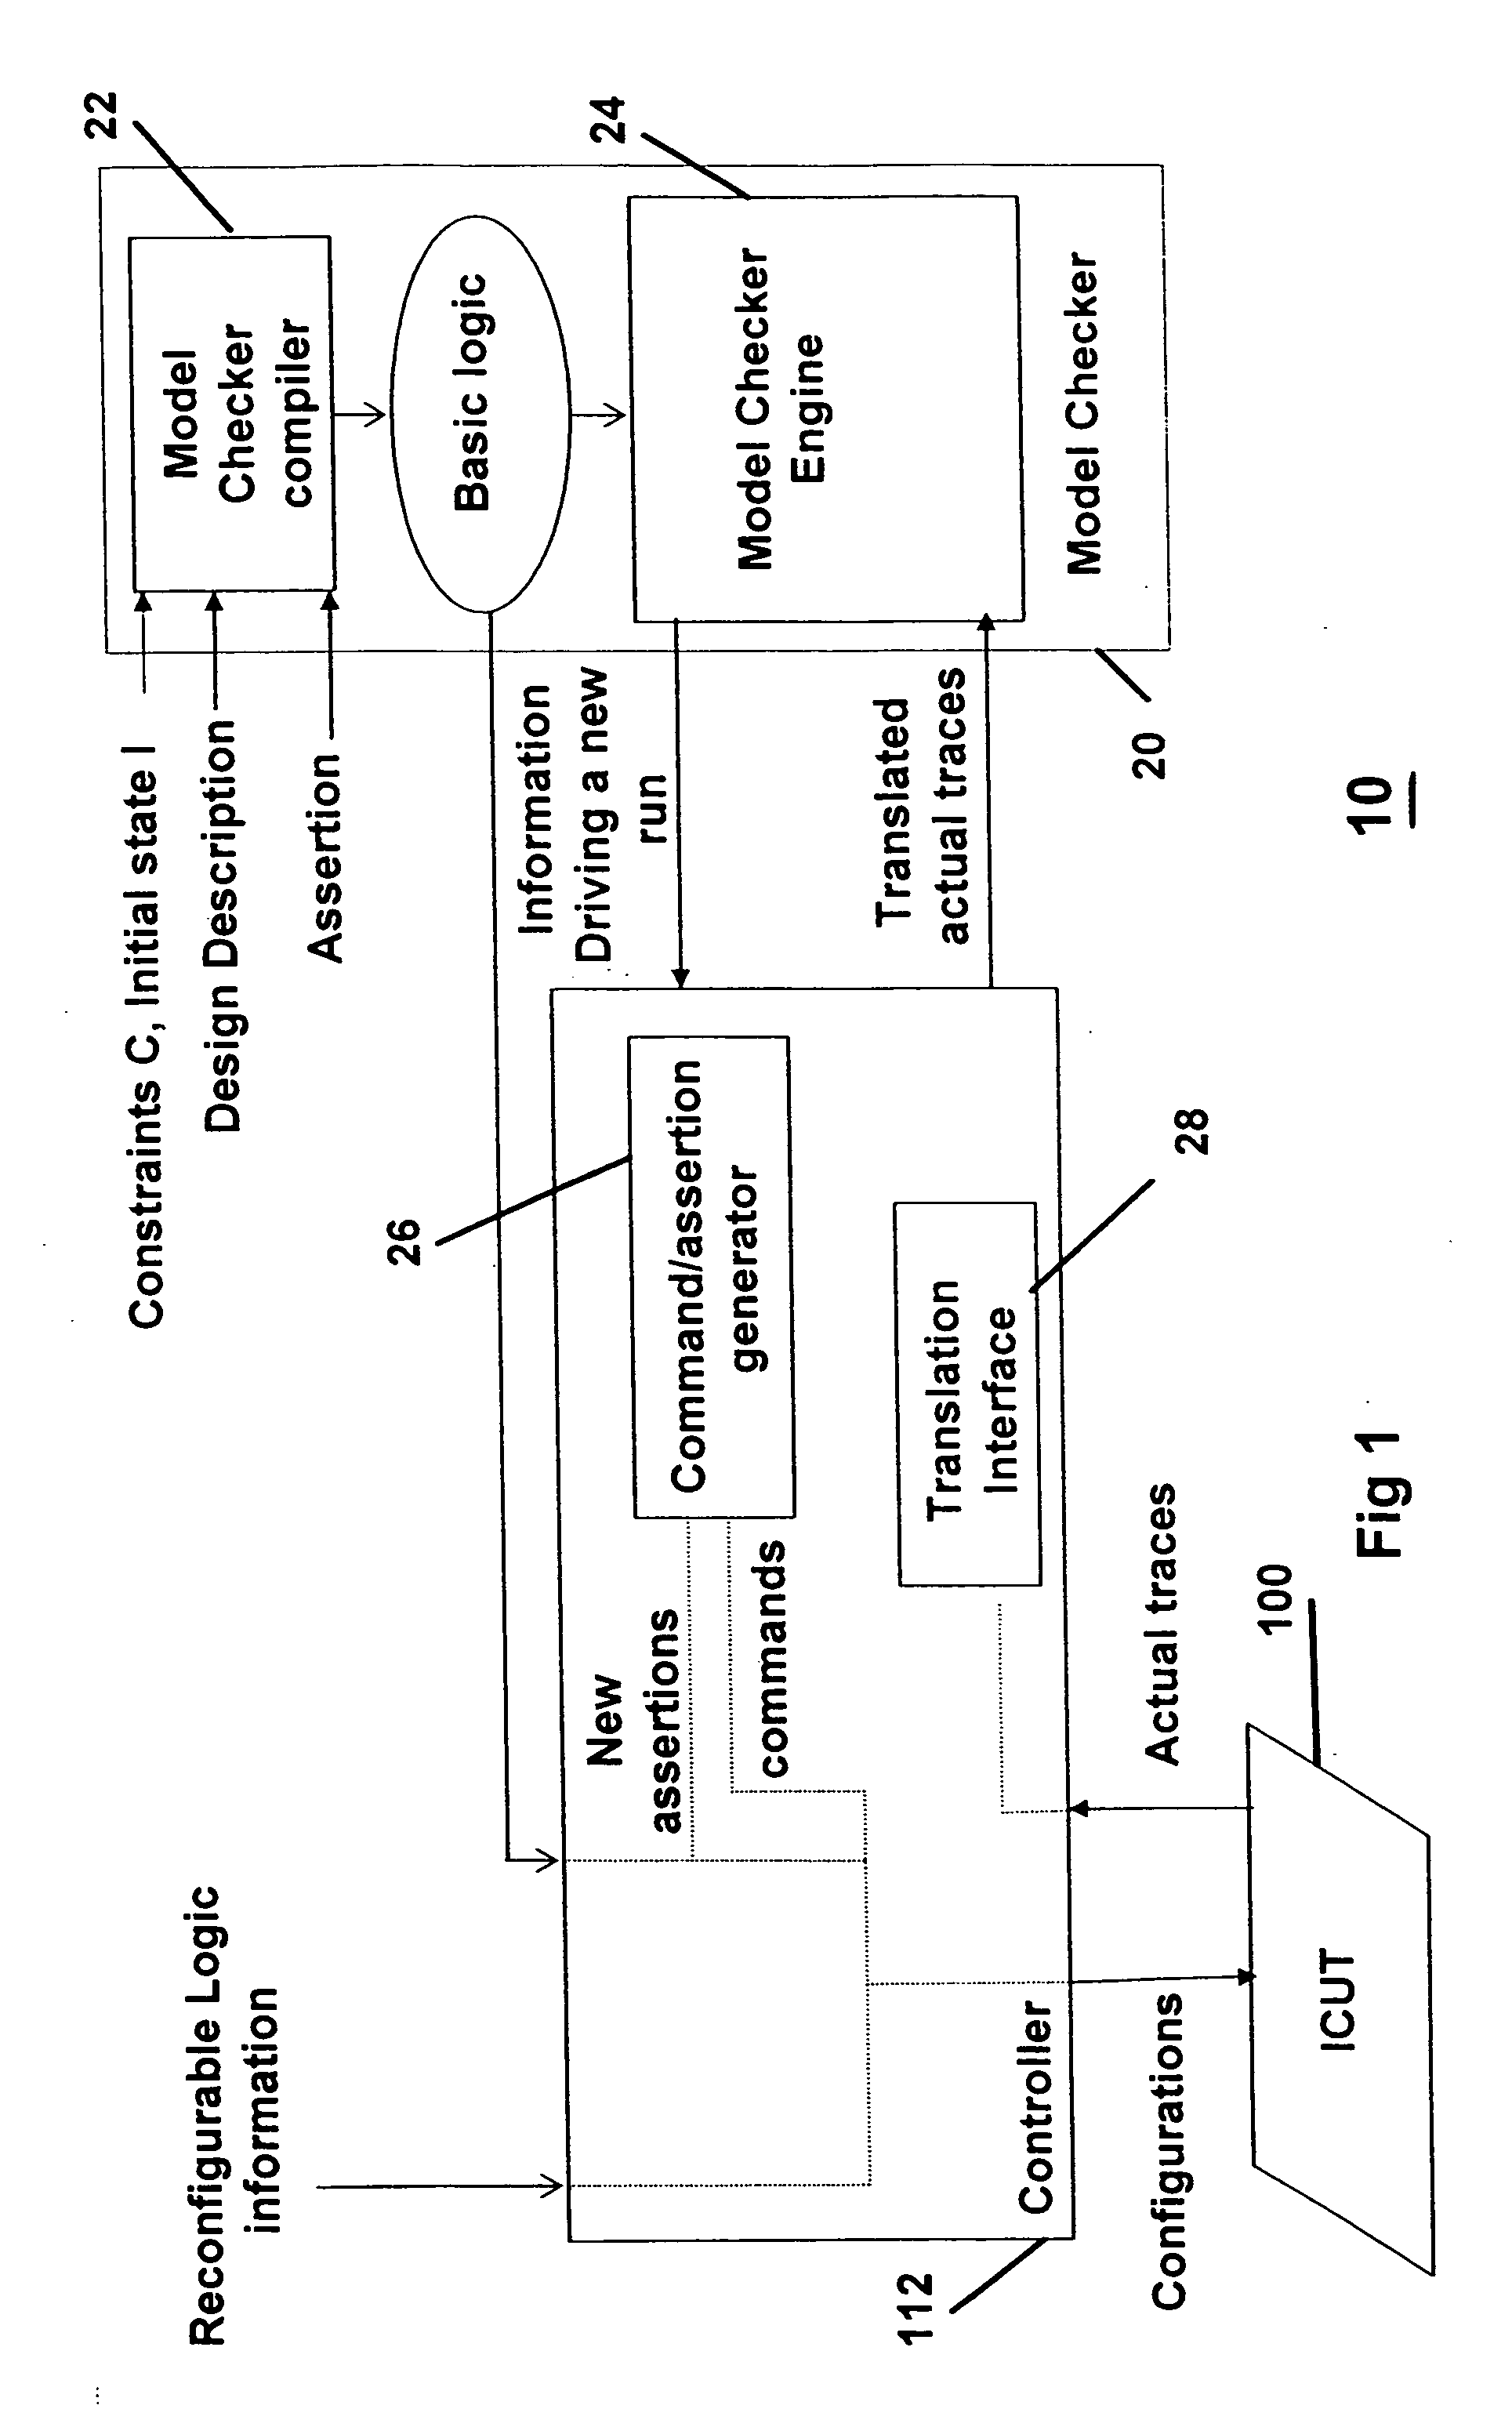 Integrated circuit analysis system and method using model checking